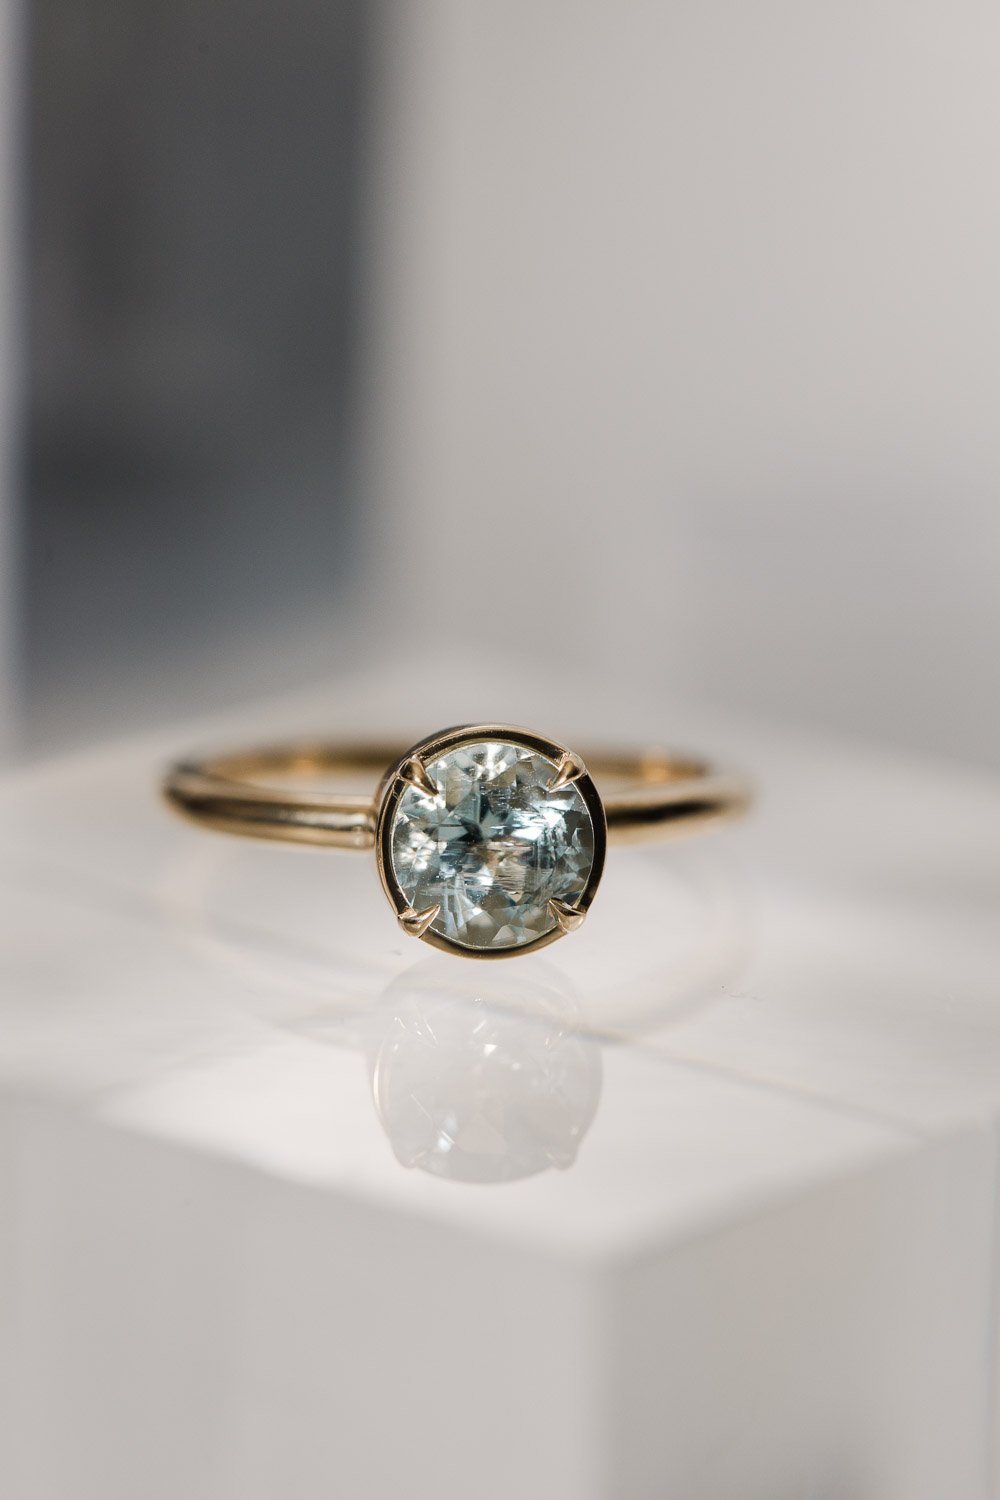 Alexandria and Company "The One Collection" yellow gold aquamarine stacking ring